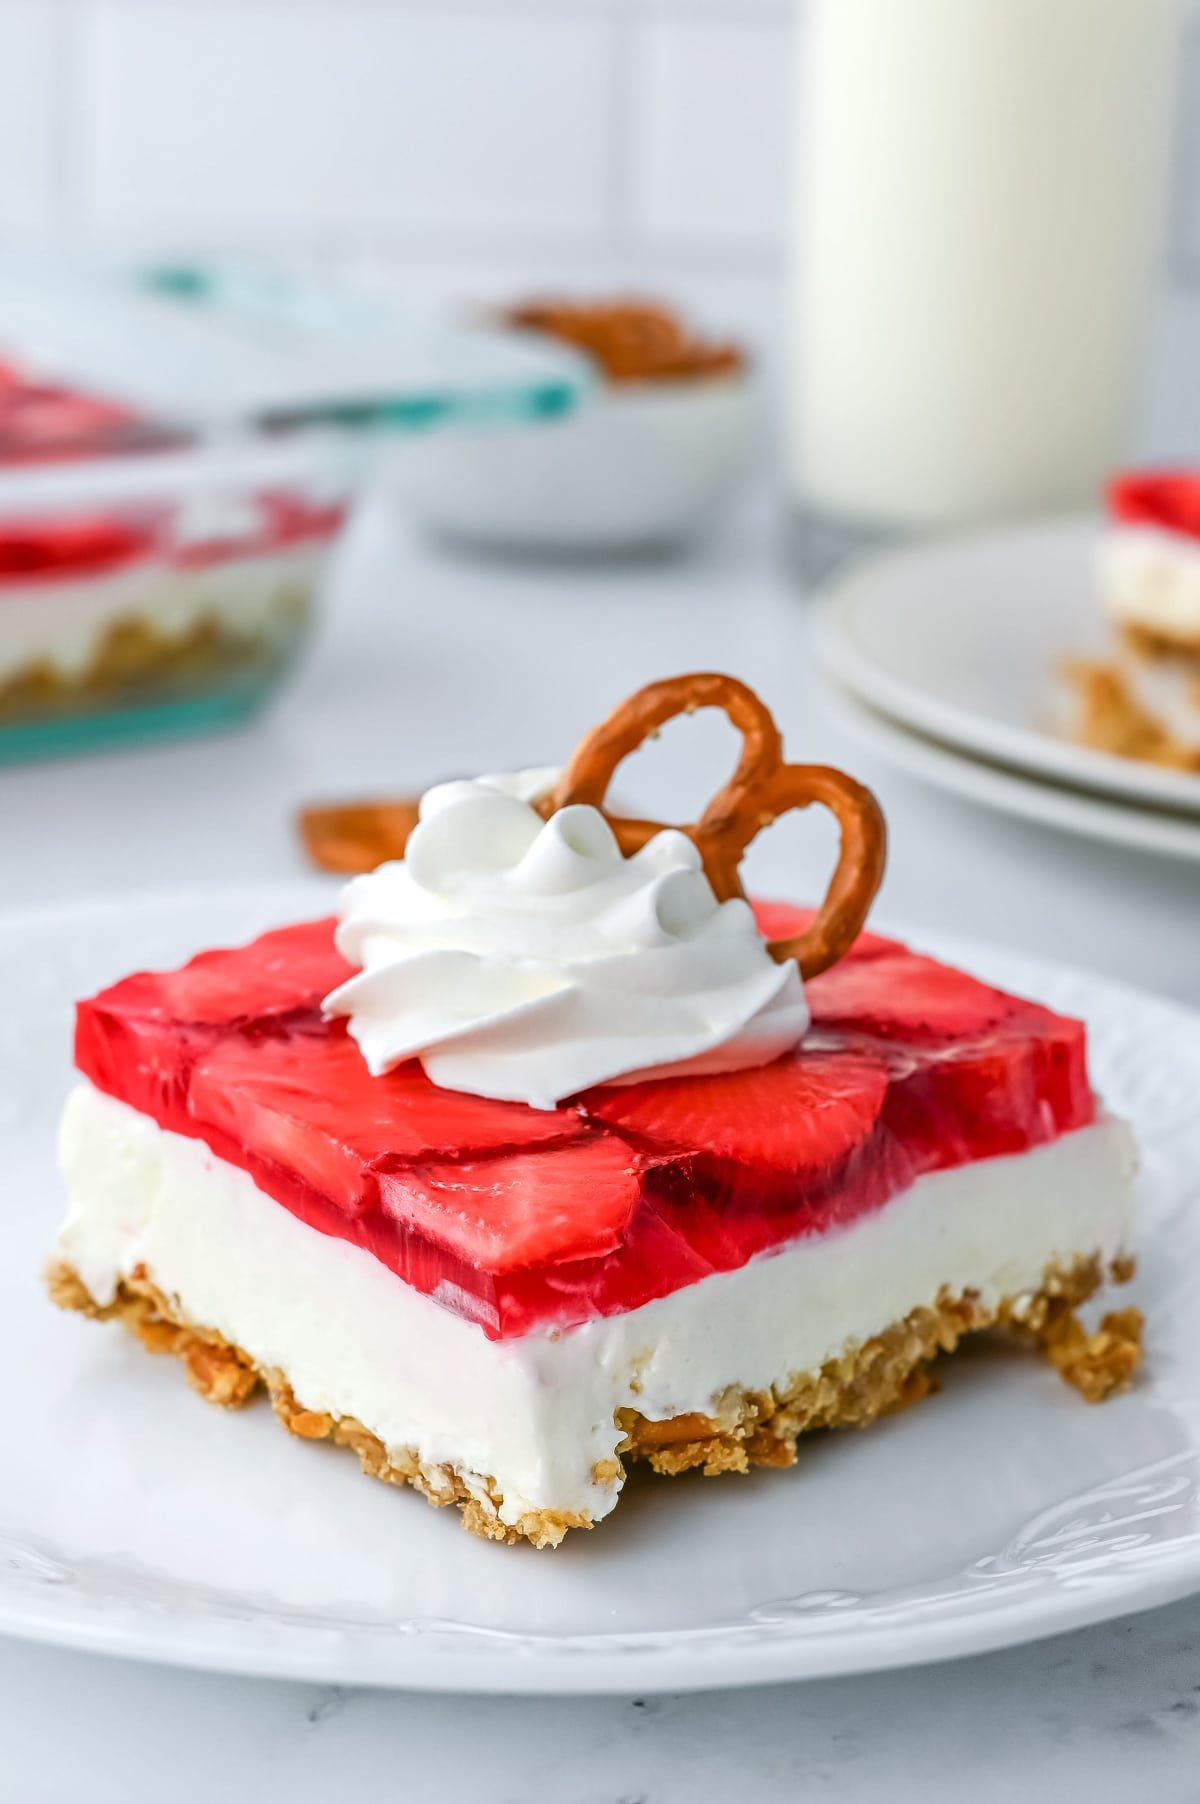 Strawberry pretzel salad bar on a plate with whipped cream and pretzels, creating a delightful strawberry pretzel salad dessert.